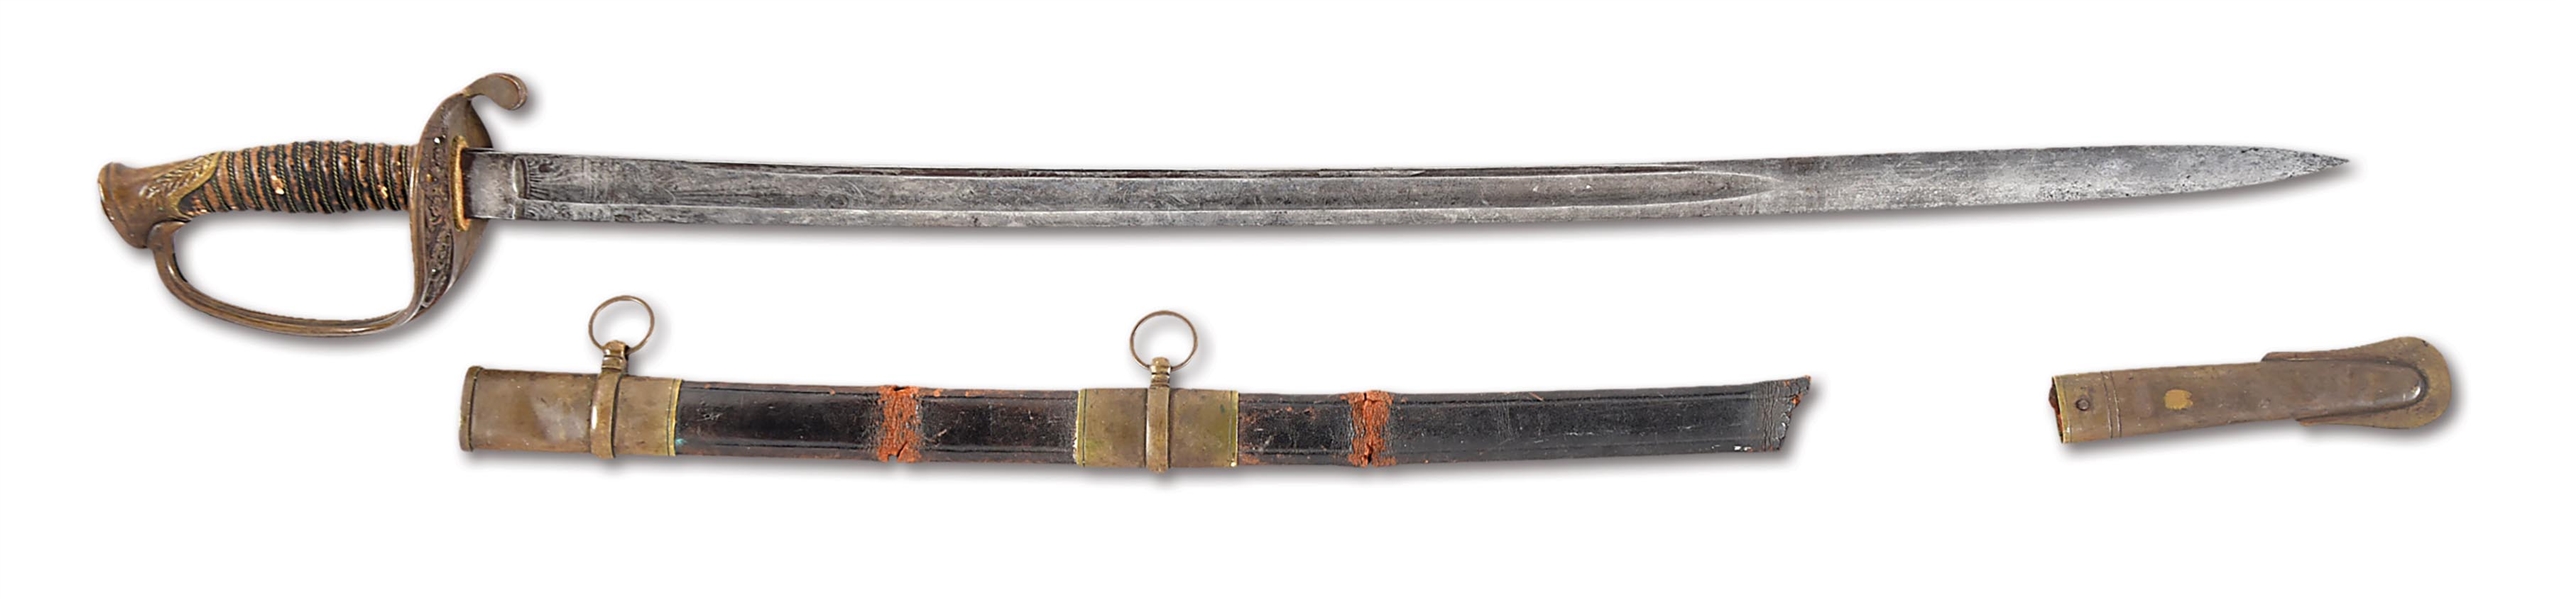 US CIVIL WAR M1850 OFFICER SWORD AND GROUPING OF HENRY CLAY CONNER, FOUGHT AT DEVILS DEN.